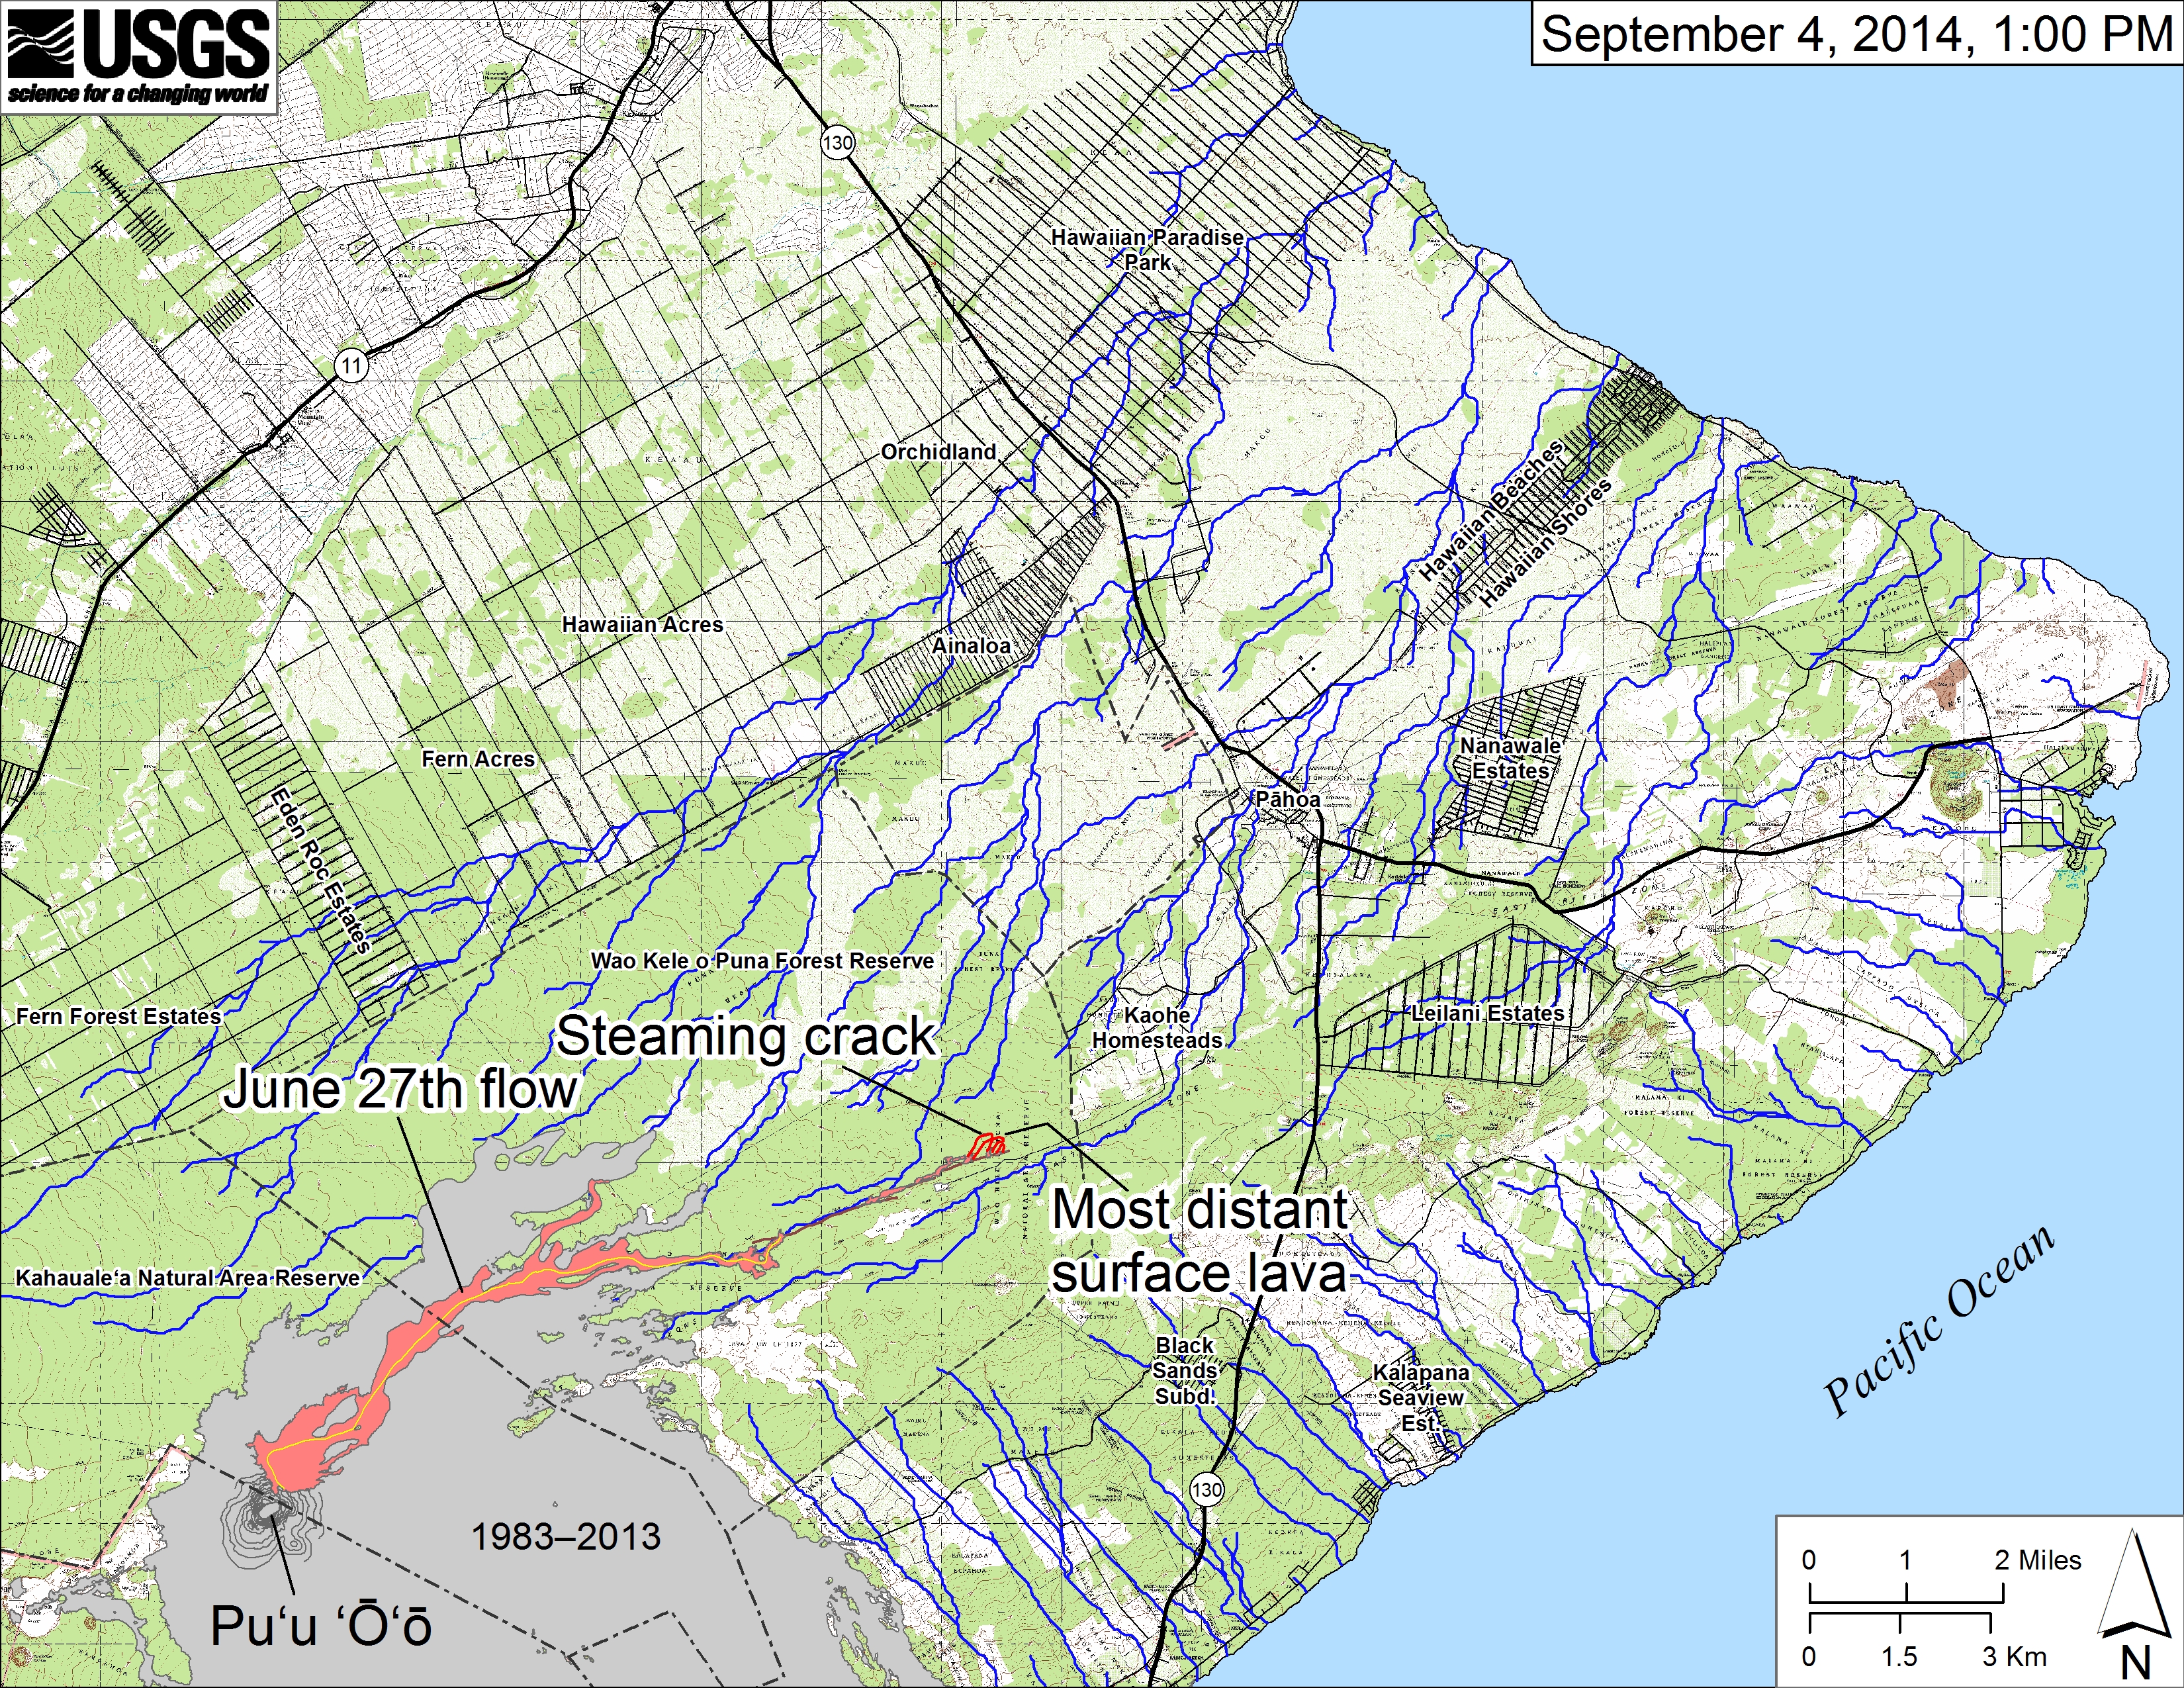 USGS HVO: Small-scale map showing the June 27th flow in Kīlauea’s East Rift Zone as of September 4, 2014. Lava on the surface at 1 PM, outlined in red, was 13.3 km (8.3 miles) from the vent and 1.2 km (0.7 miles) from the east boundary of the Wao Kele o Puna Forest Reserve. The front of the flow was spilling into another crack, which was steaming. The blue lines show potential flow paths calculated from a 1983 digital elevation model (DEM). All older lava flows (1983–2014) are shown in gray; the yellow line marks the lava tube. For an explanation of potential flow path calculations see: http://pubs.usgs.gov/of/2007/1264/. 